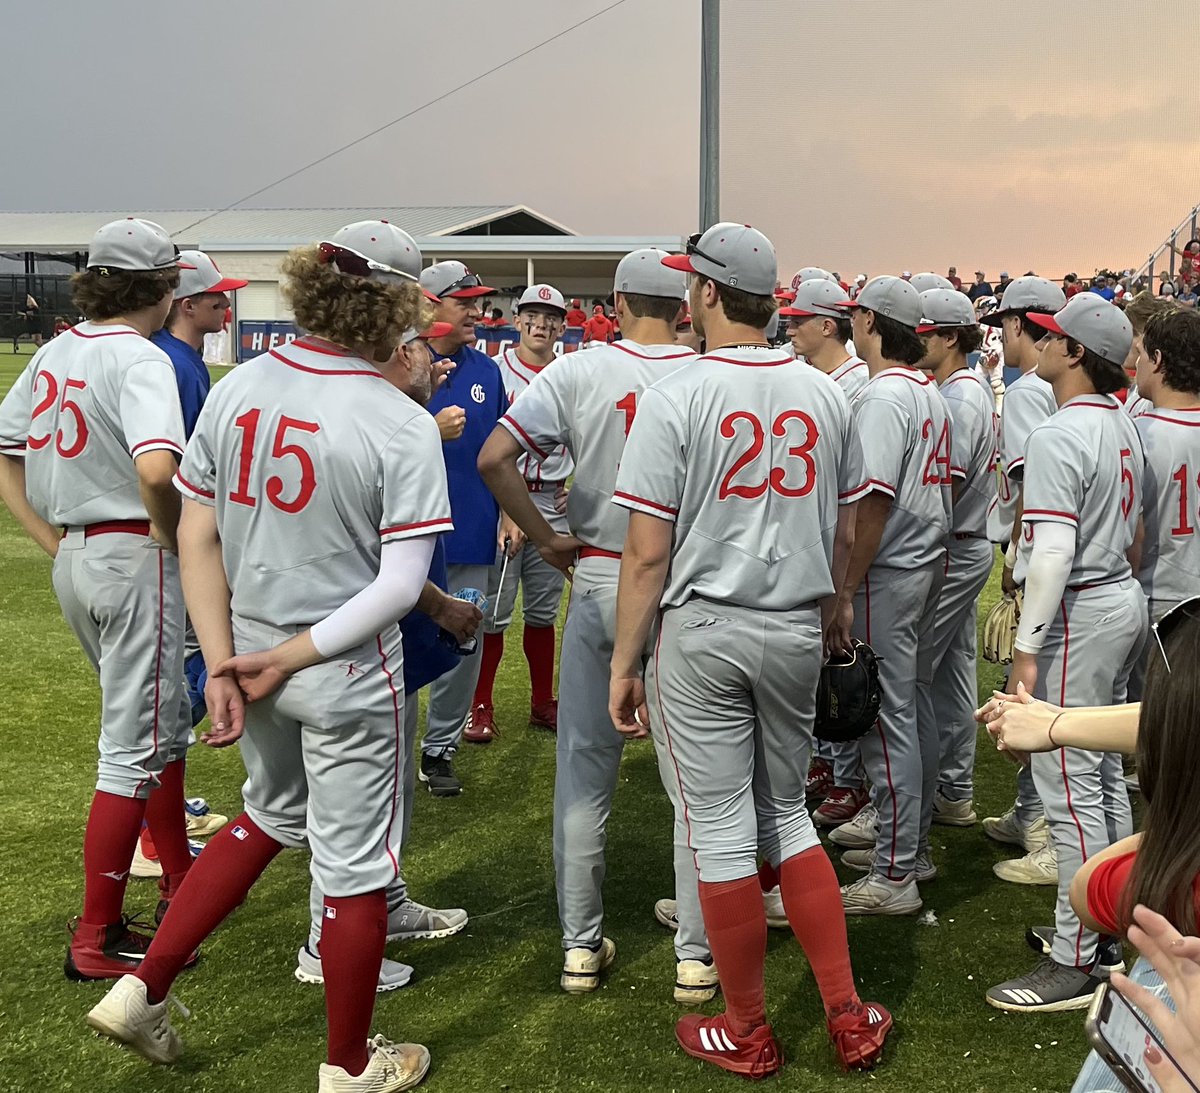 Congratulations, Coach Webster and Mustang Baseball! Hard fought 2-1 win over Midlo Heritage. Keep that 1-0 mentality!
#RahRahRahMustangsFight!